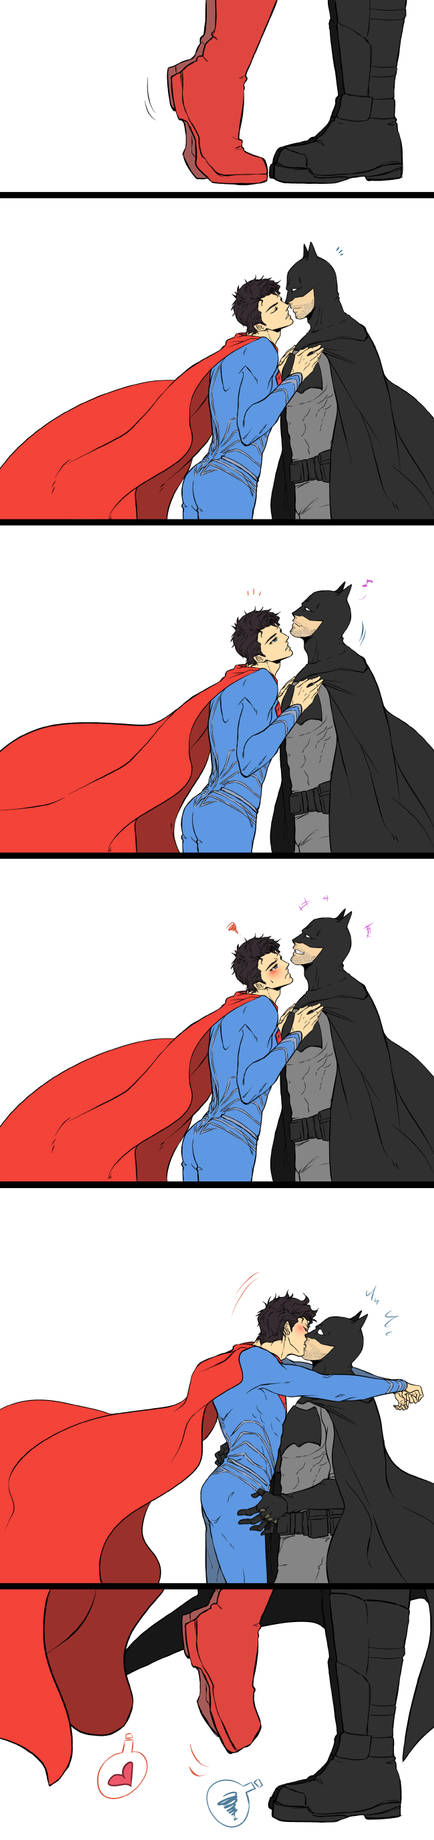 BatSup: Kiss on Tip Toes